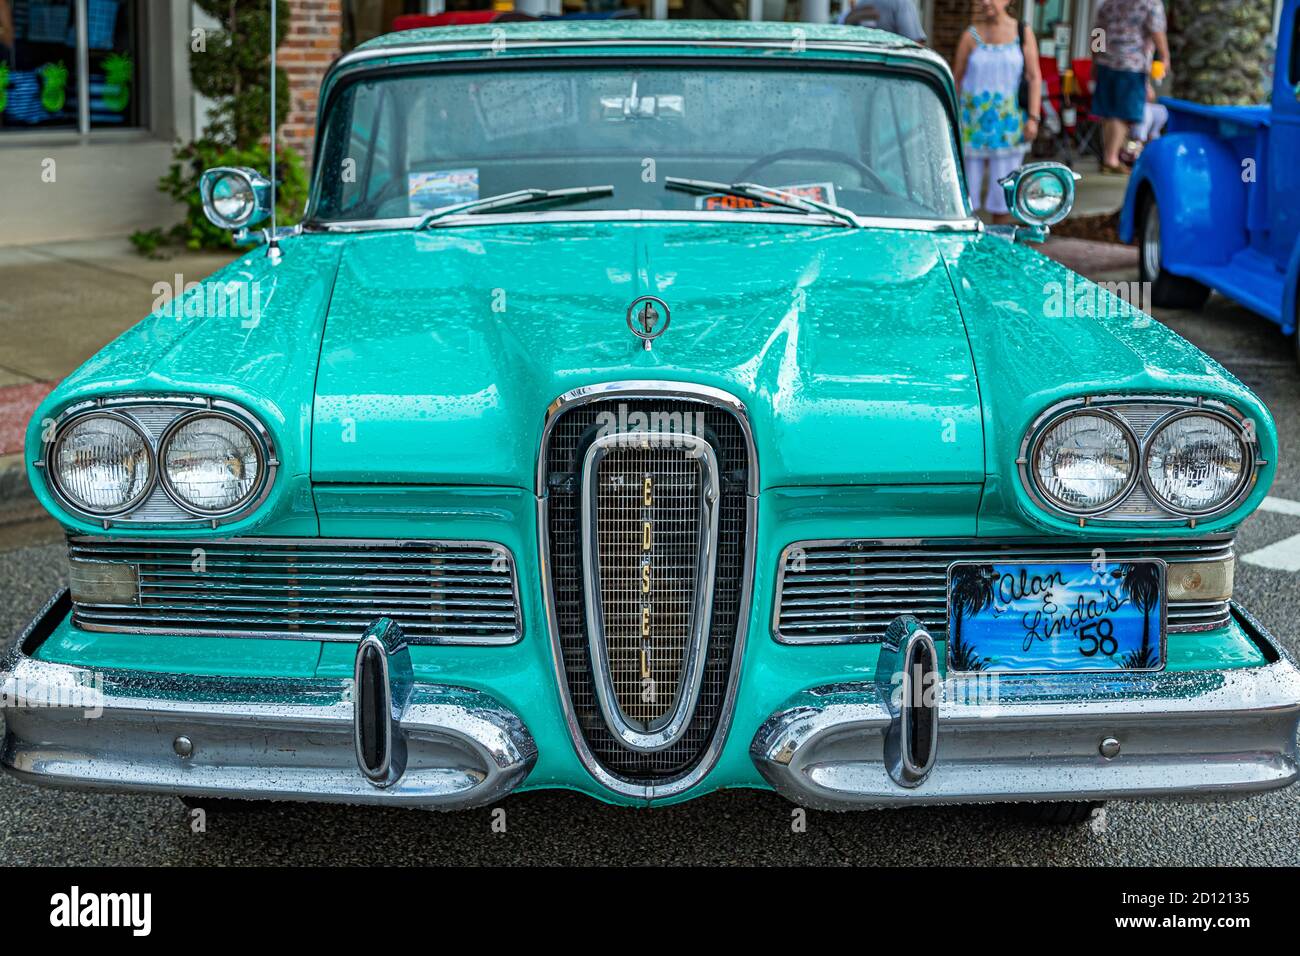 New Smyrna Beach, FL - August 12, 2017: 1958 Ford Edsel Pacer at the Canal Street Car Show. Stock Photo